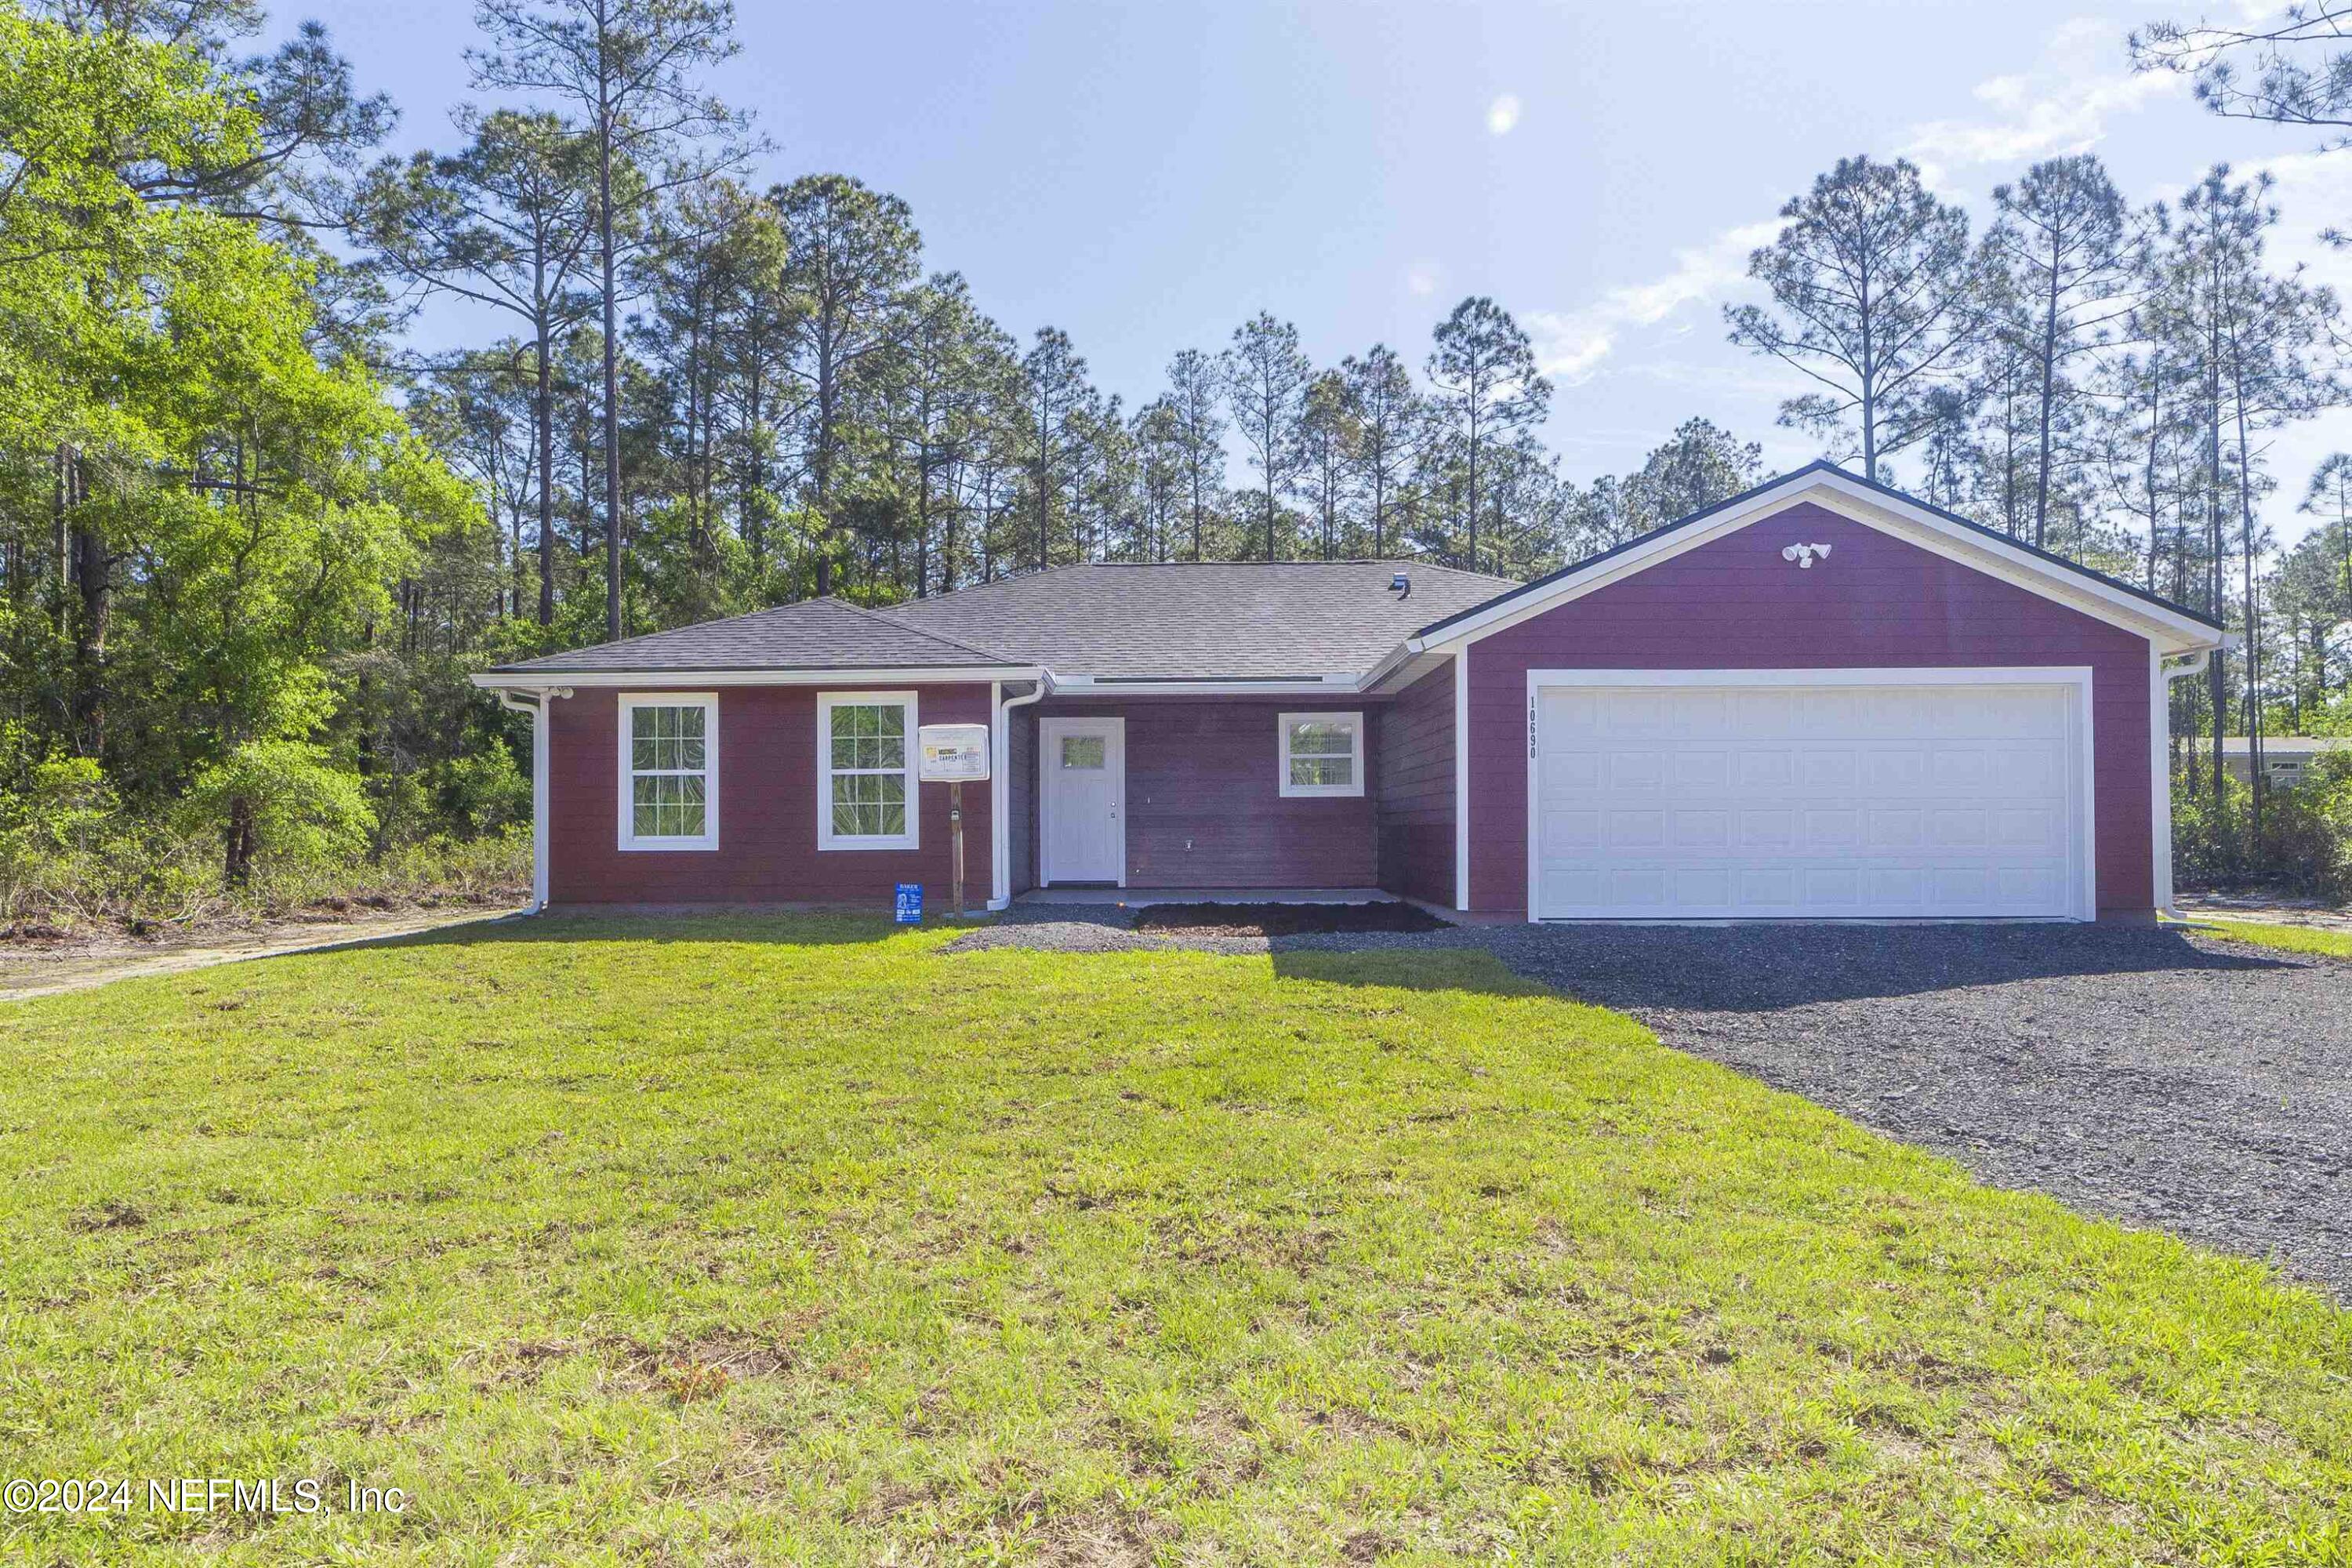 Hastings, FL home for sale located at 10690 Carpenter Avenue, Hastings, FL 32145